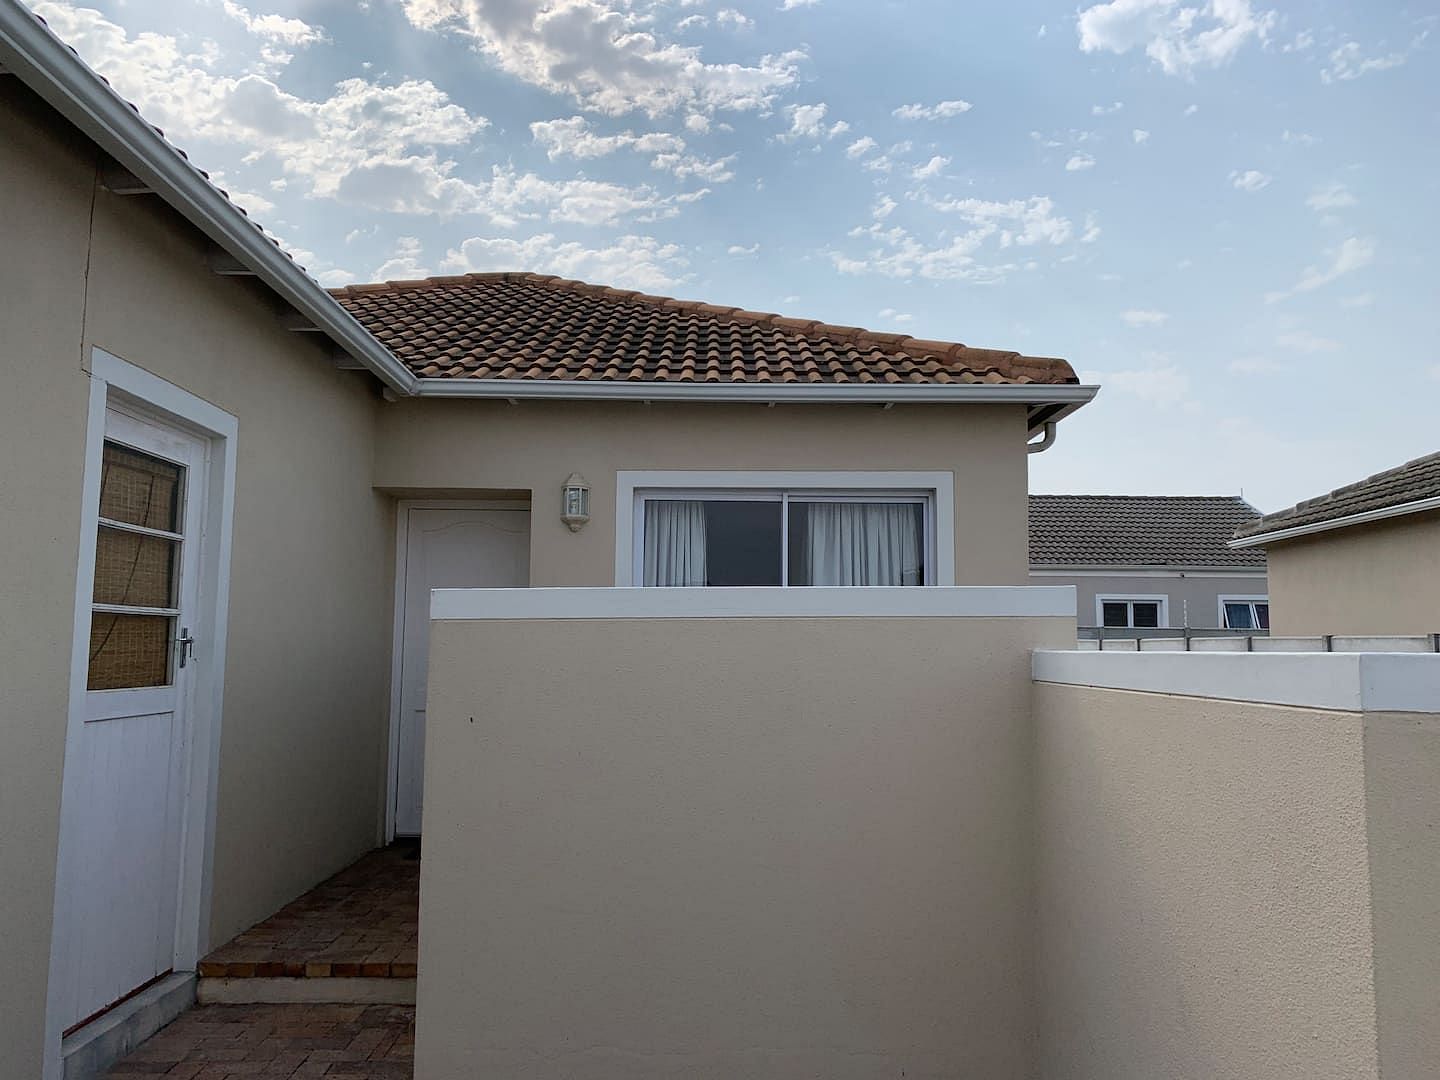 JWguest Residential Home at Cape Town, Western Cape | Wonderful Maison | Jwbnb no brobnb 18